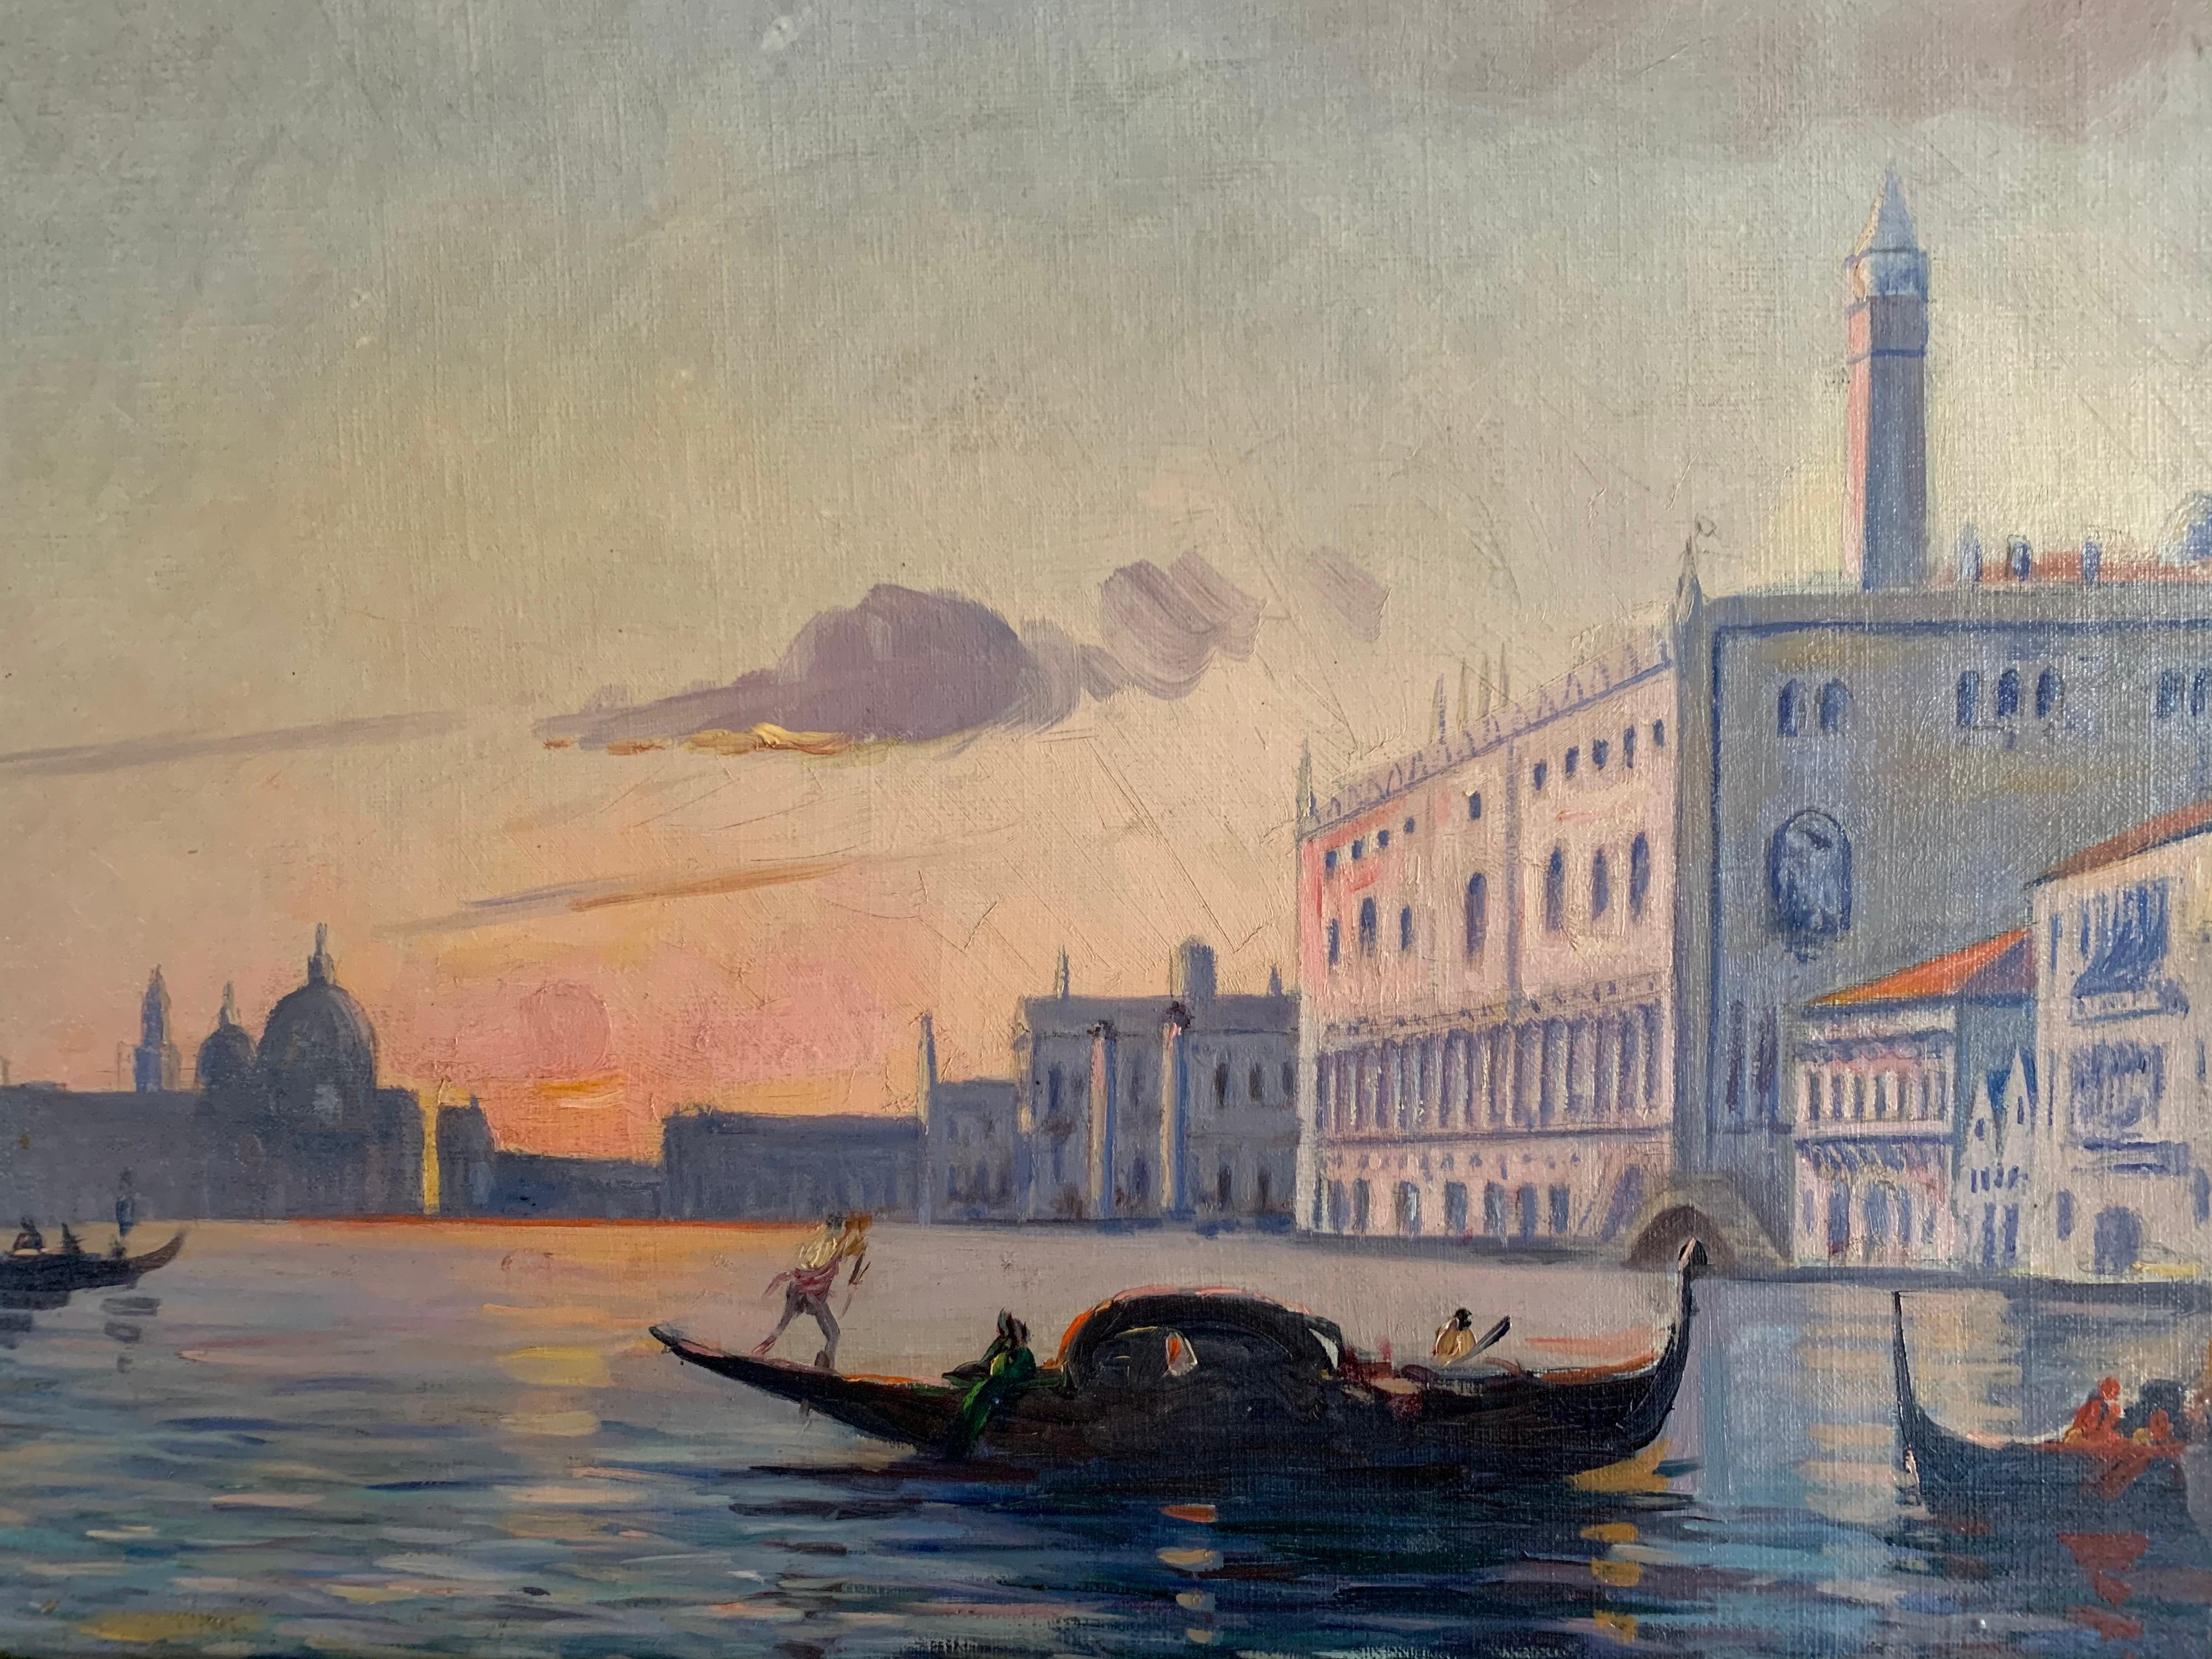 Sunset over the Grand Canal
French School, late 19th century
oil painting on canvas, framed
canvas: 13.5 x 21.5 inches
framed: 18 x 26 inches

Beautiful 19th century French oil painting on canvas, depicting the ever radiant Grand Canal in Venice,